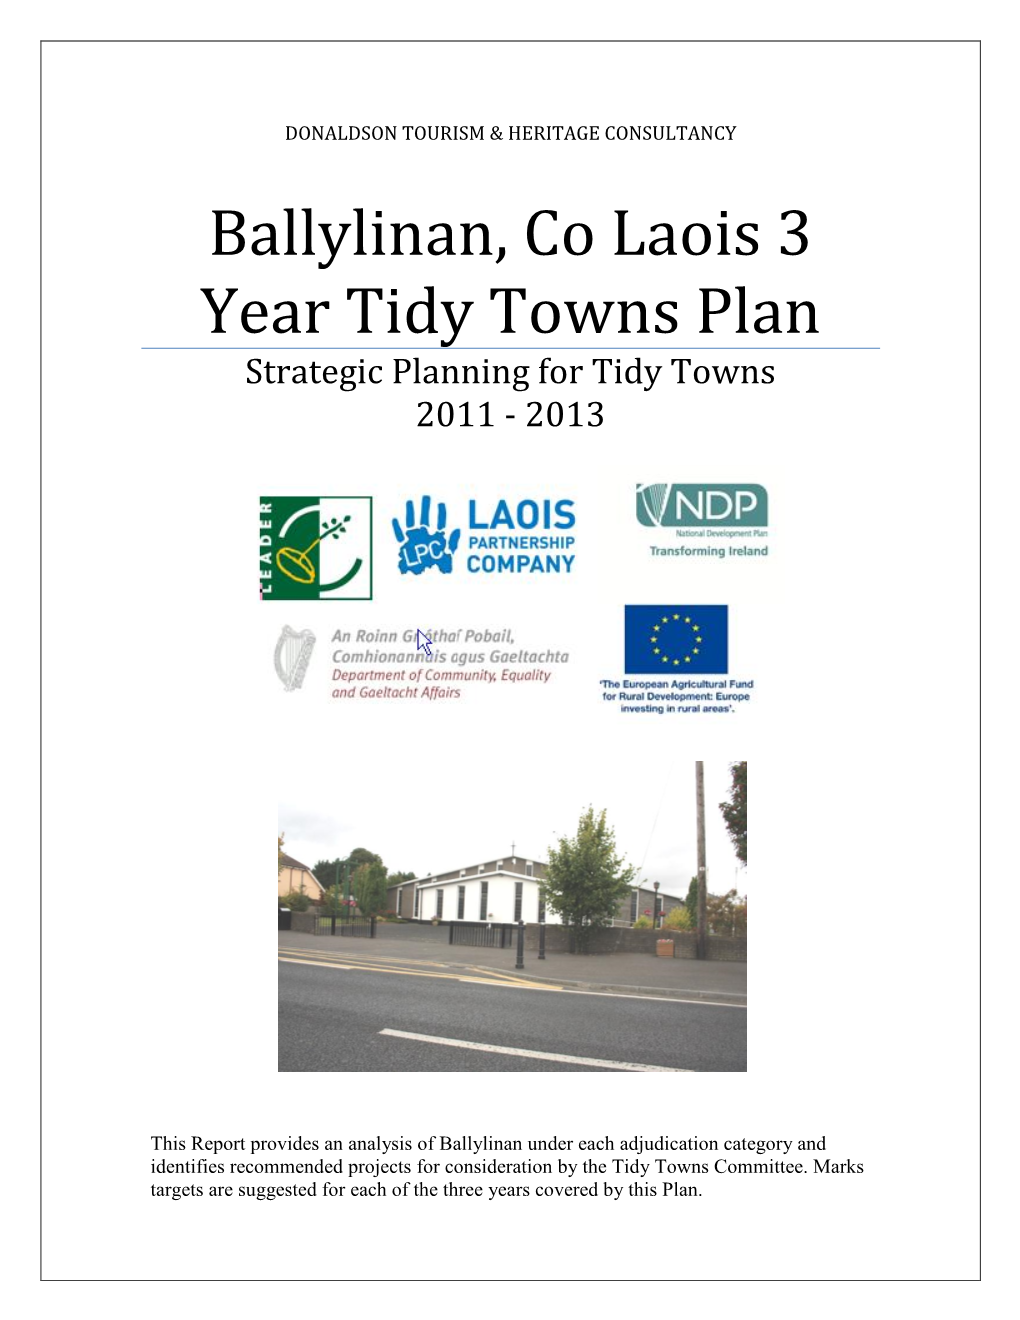 Ballylinan, Co Laois 3 Year Tidy Towns Plan Strategic Planning for Tidy Towns 2011 - 2013